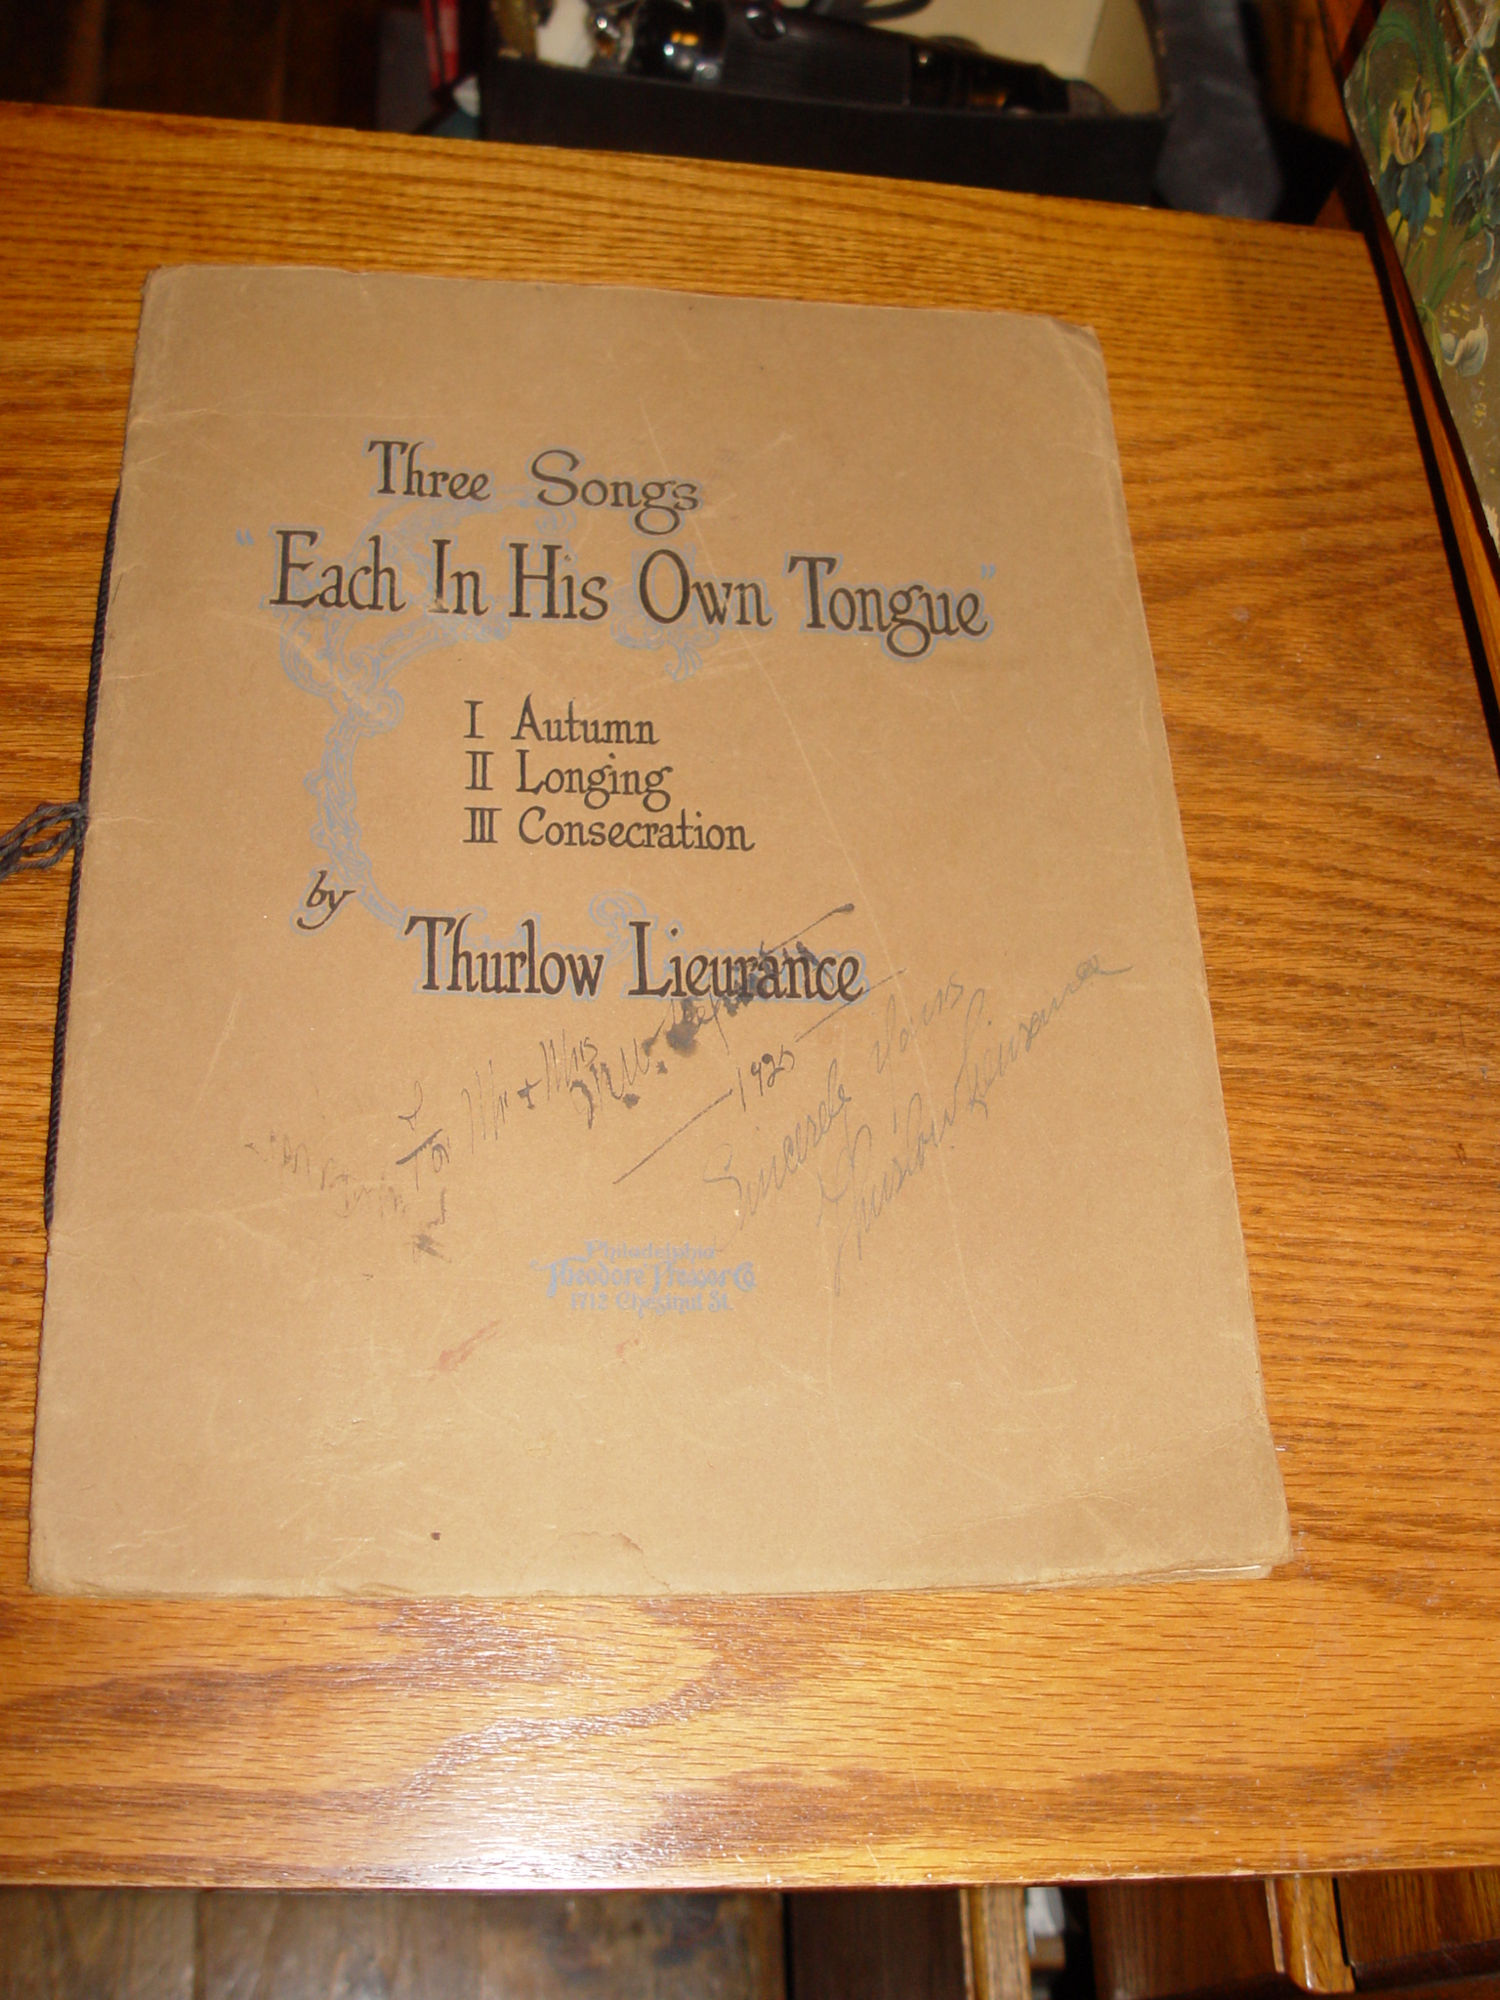 1925 Three Songs "Each In His Own
                        Tongue" Autographed Thurlow Lieurance